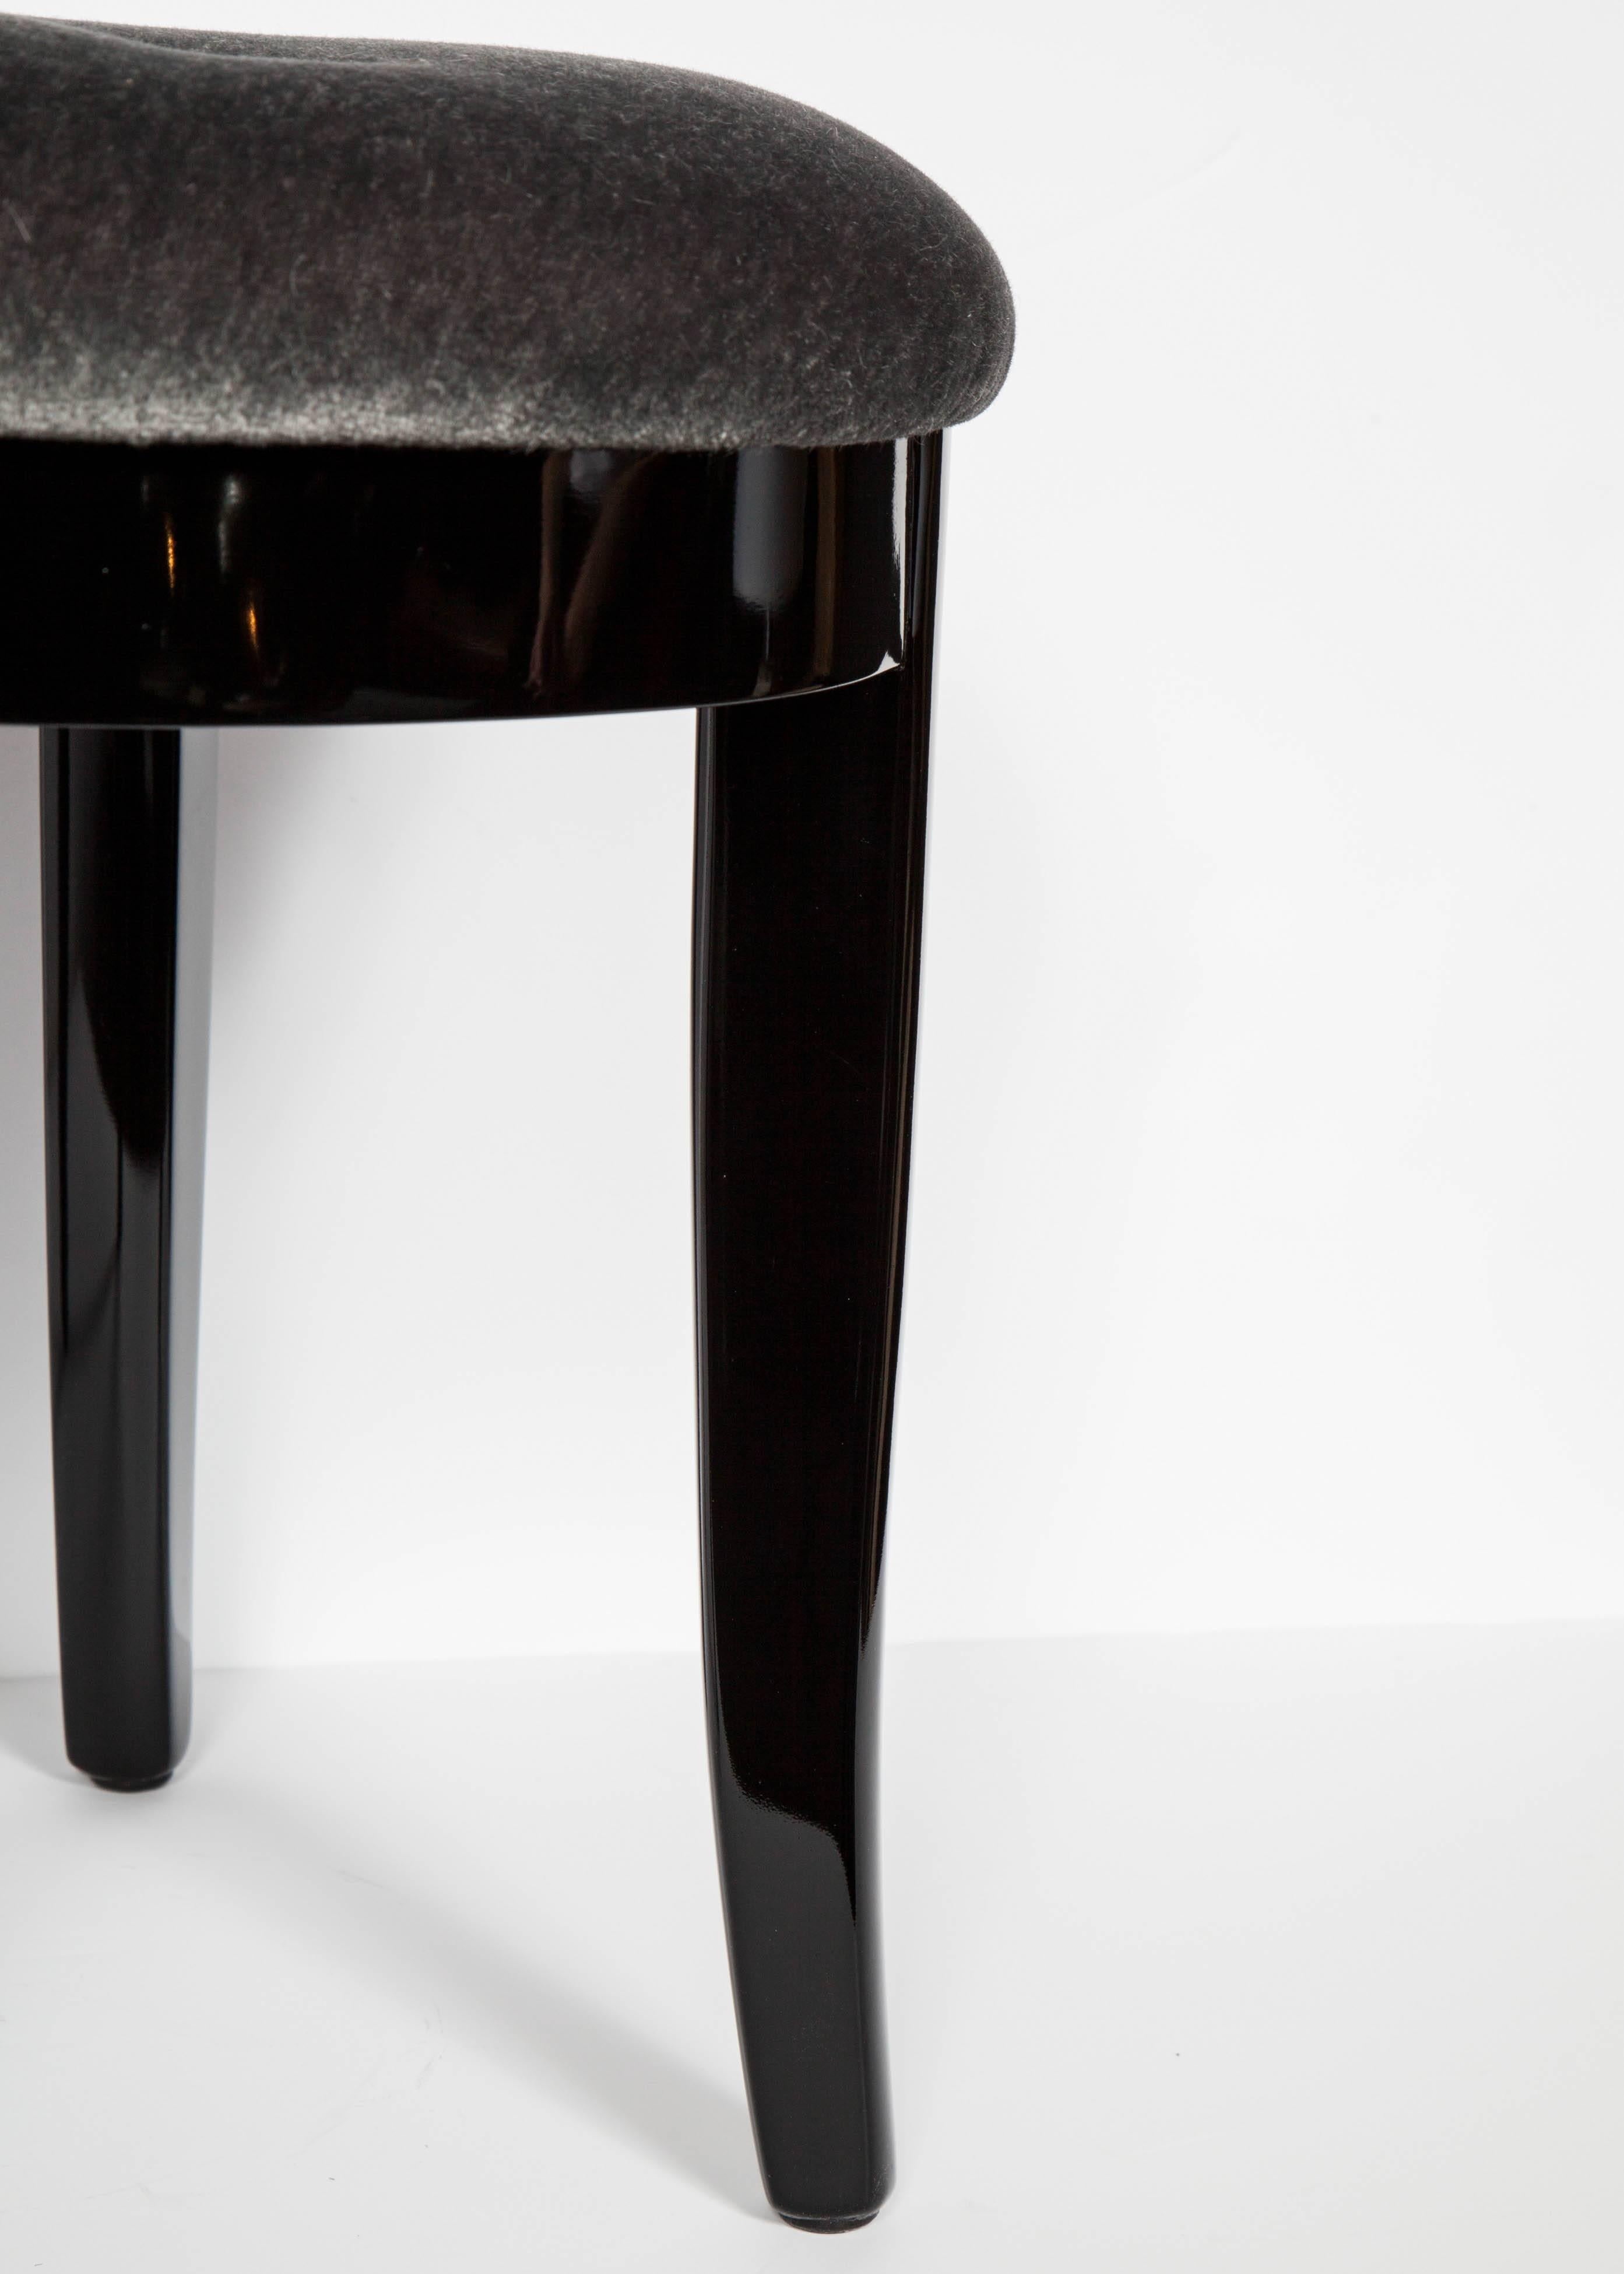 Mid-20th Century Elegant Art Deco Vanity Stool in Black Lacquer and Grey Mohair